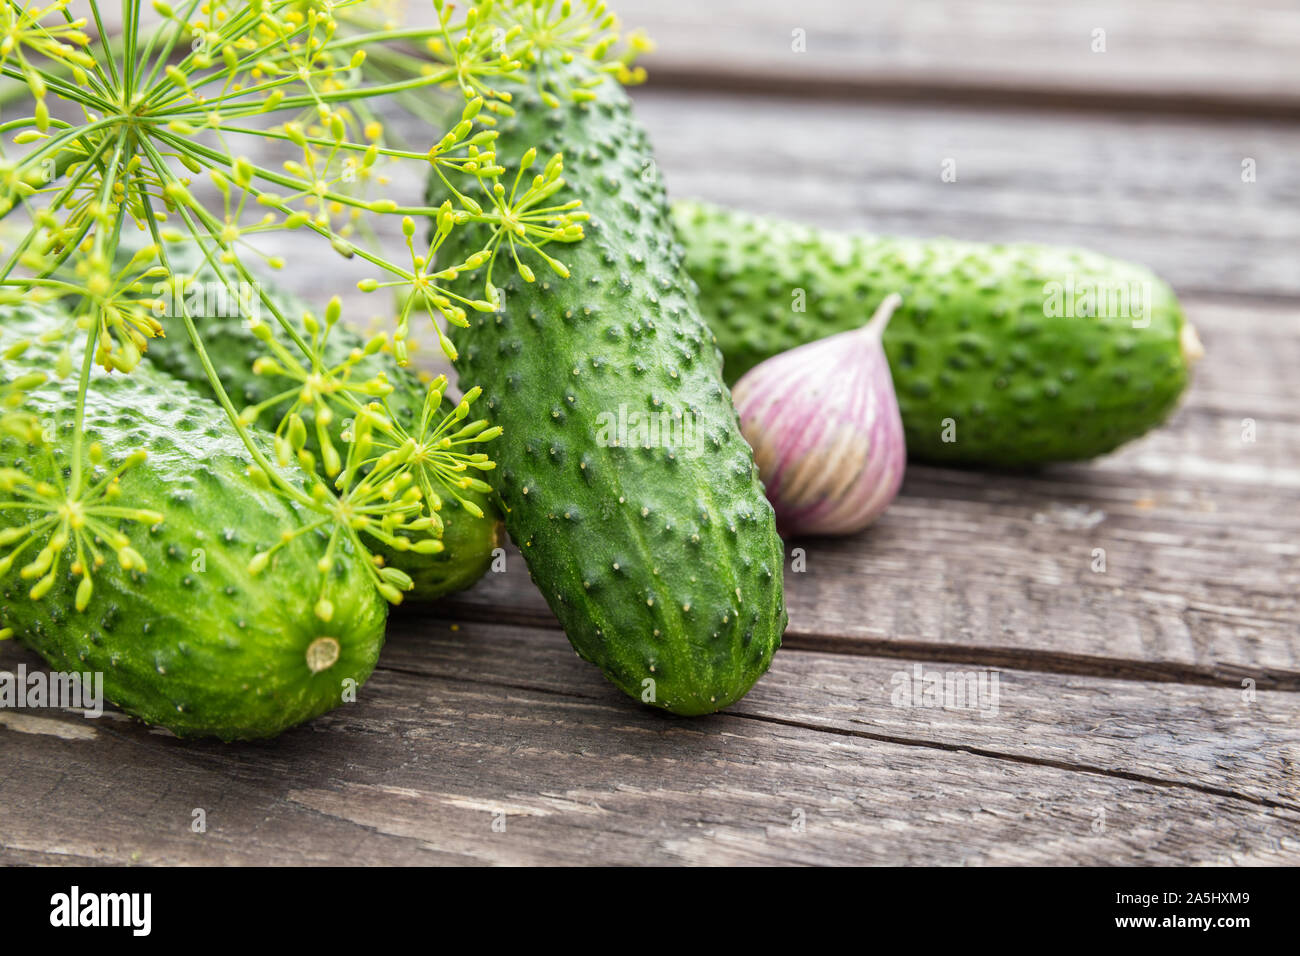 Fresh cucumbers, dill and garlic on a dark wooden table, ingredients for pickling cucumbers Stock Photo